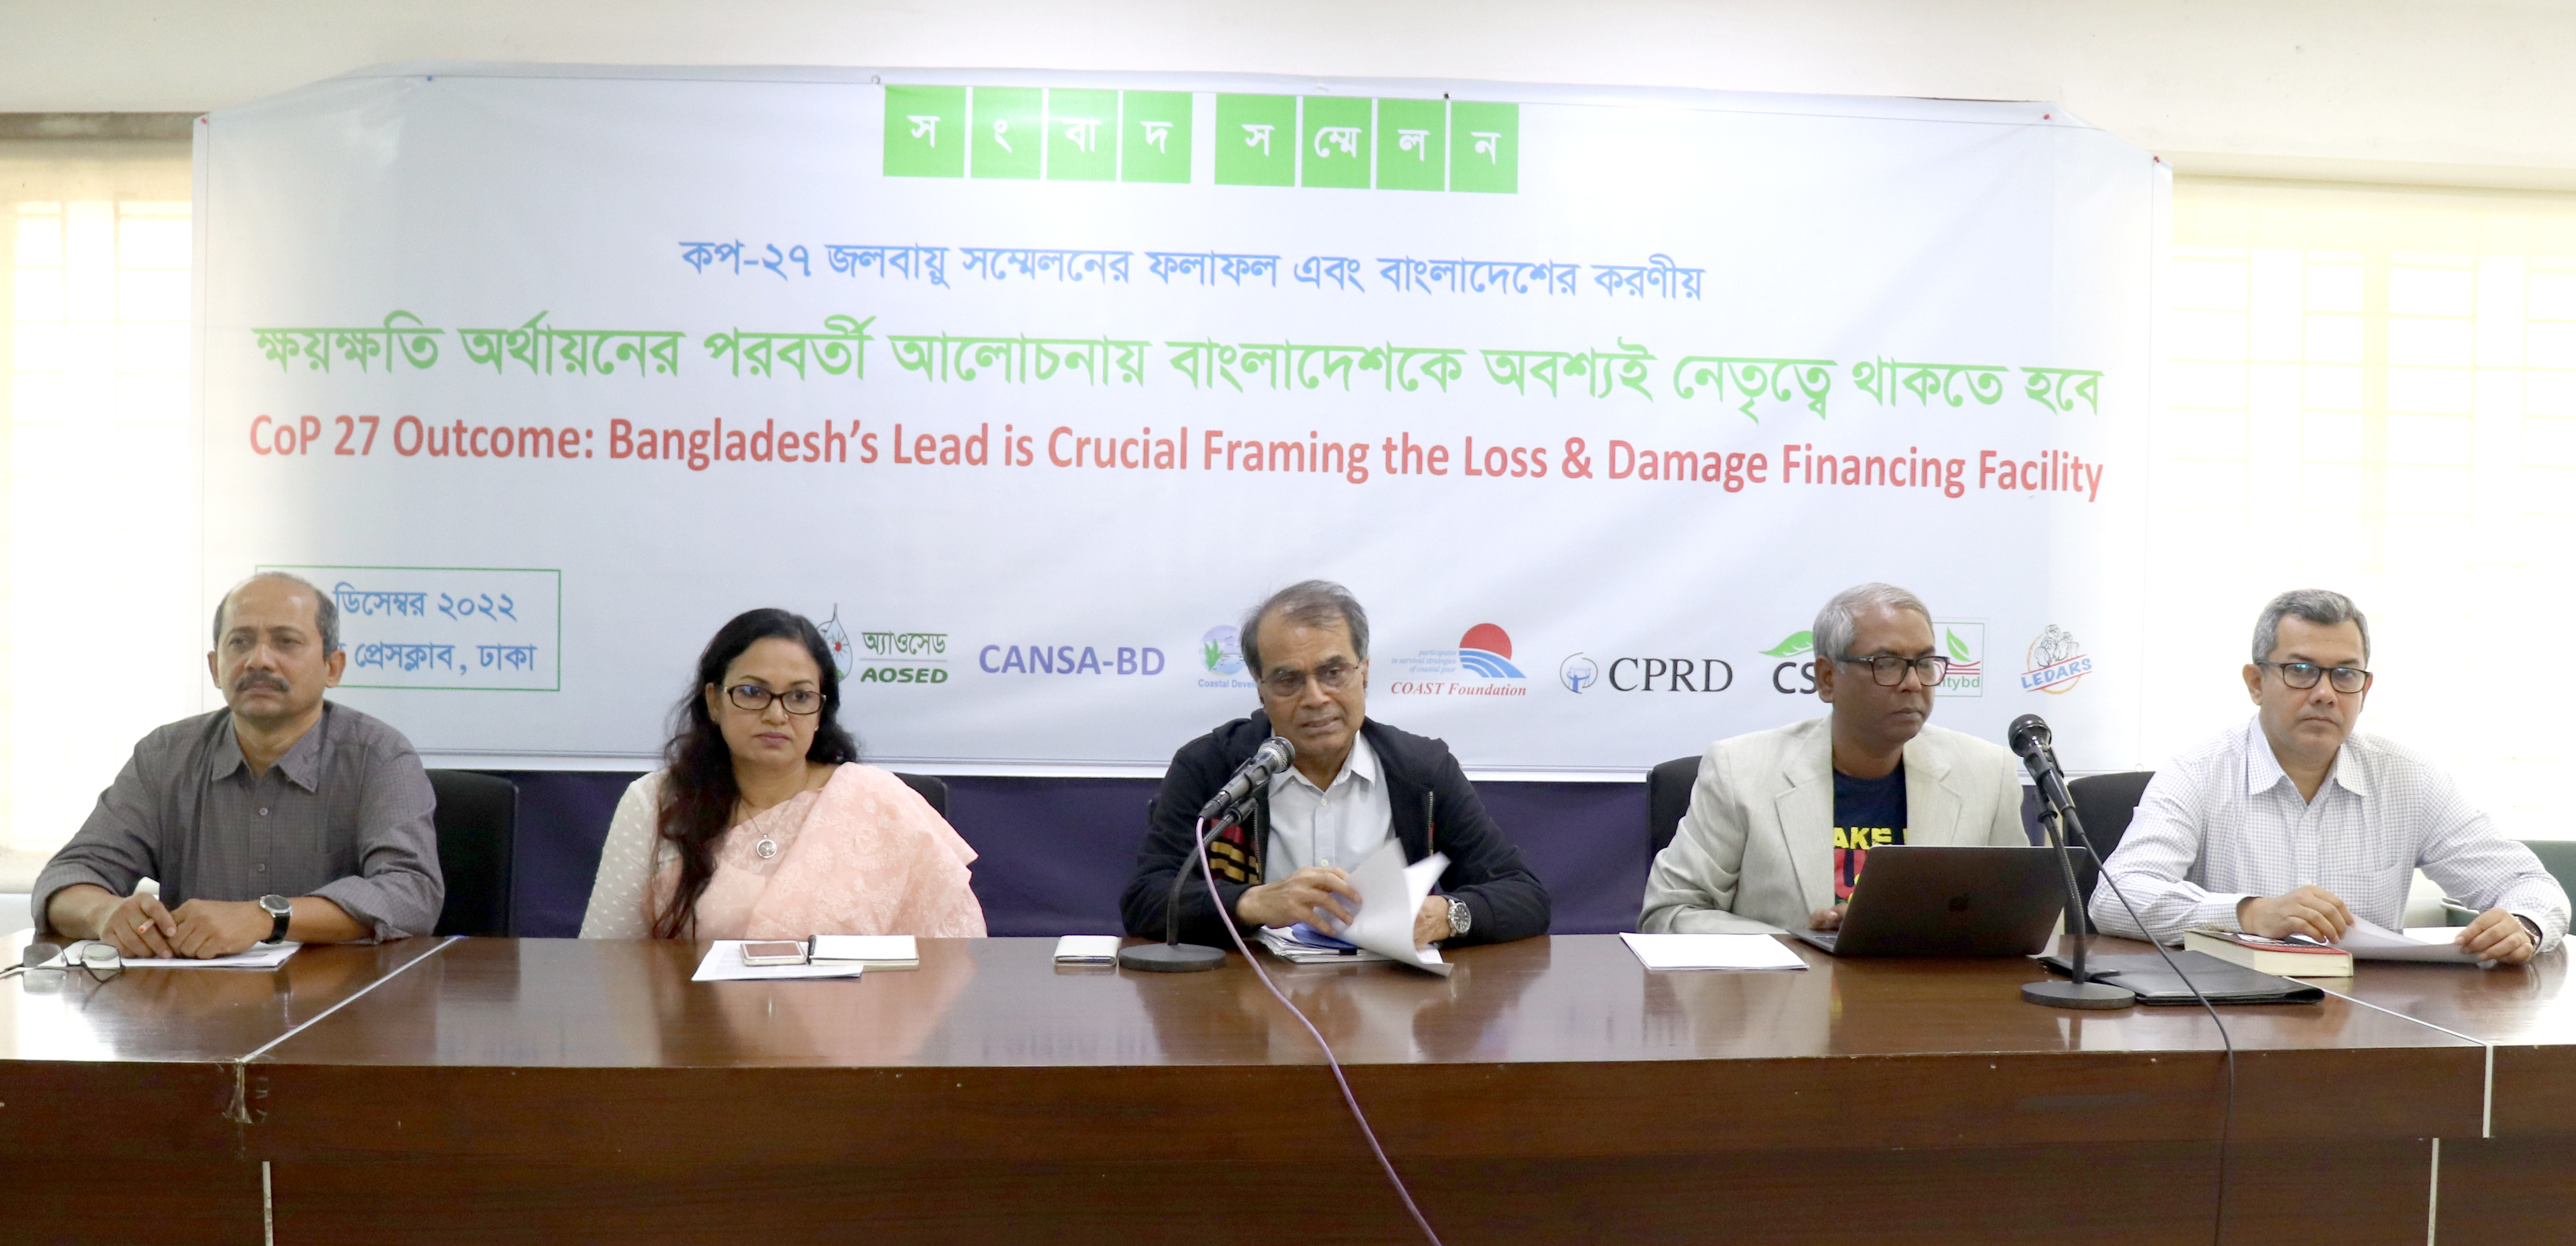 Bangladesh's lead is crucial for LDCs' position to develop framework for Loss & Damage Finance Facility